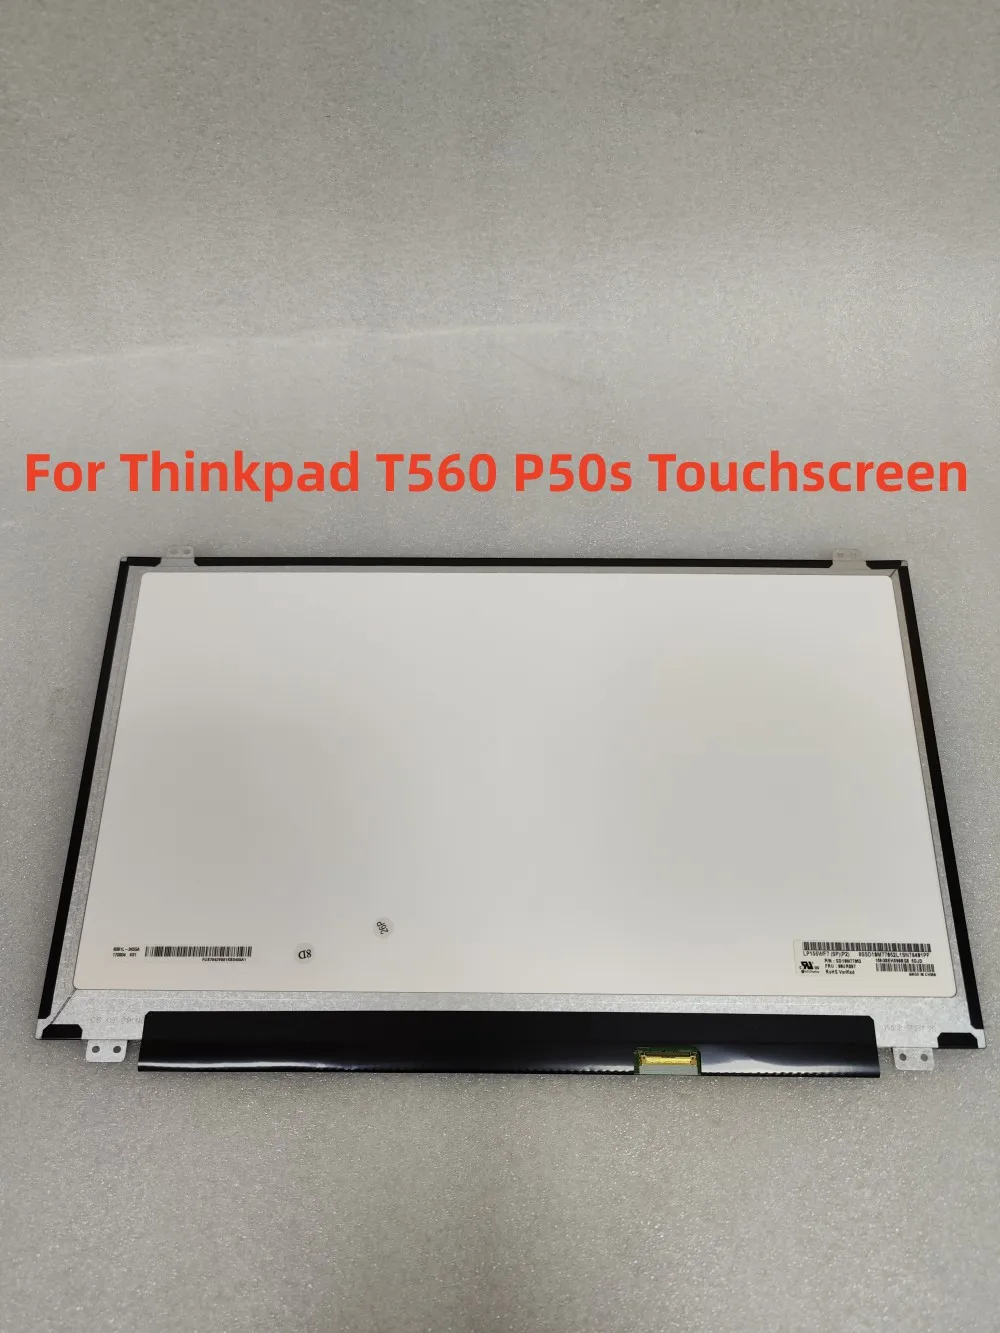 

Laptop Touch Screen LCD Display LP156WF7-SPB2 LP156WF7 SPP2 00NY534 00UR897 For Lenovo Thinkpad T560 P50S 15.6 FHD IPS AG InCell